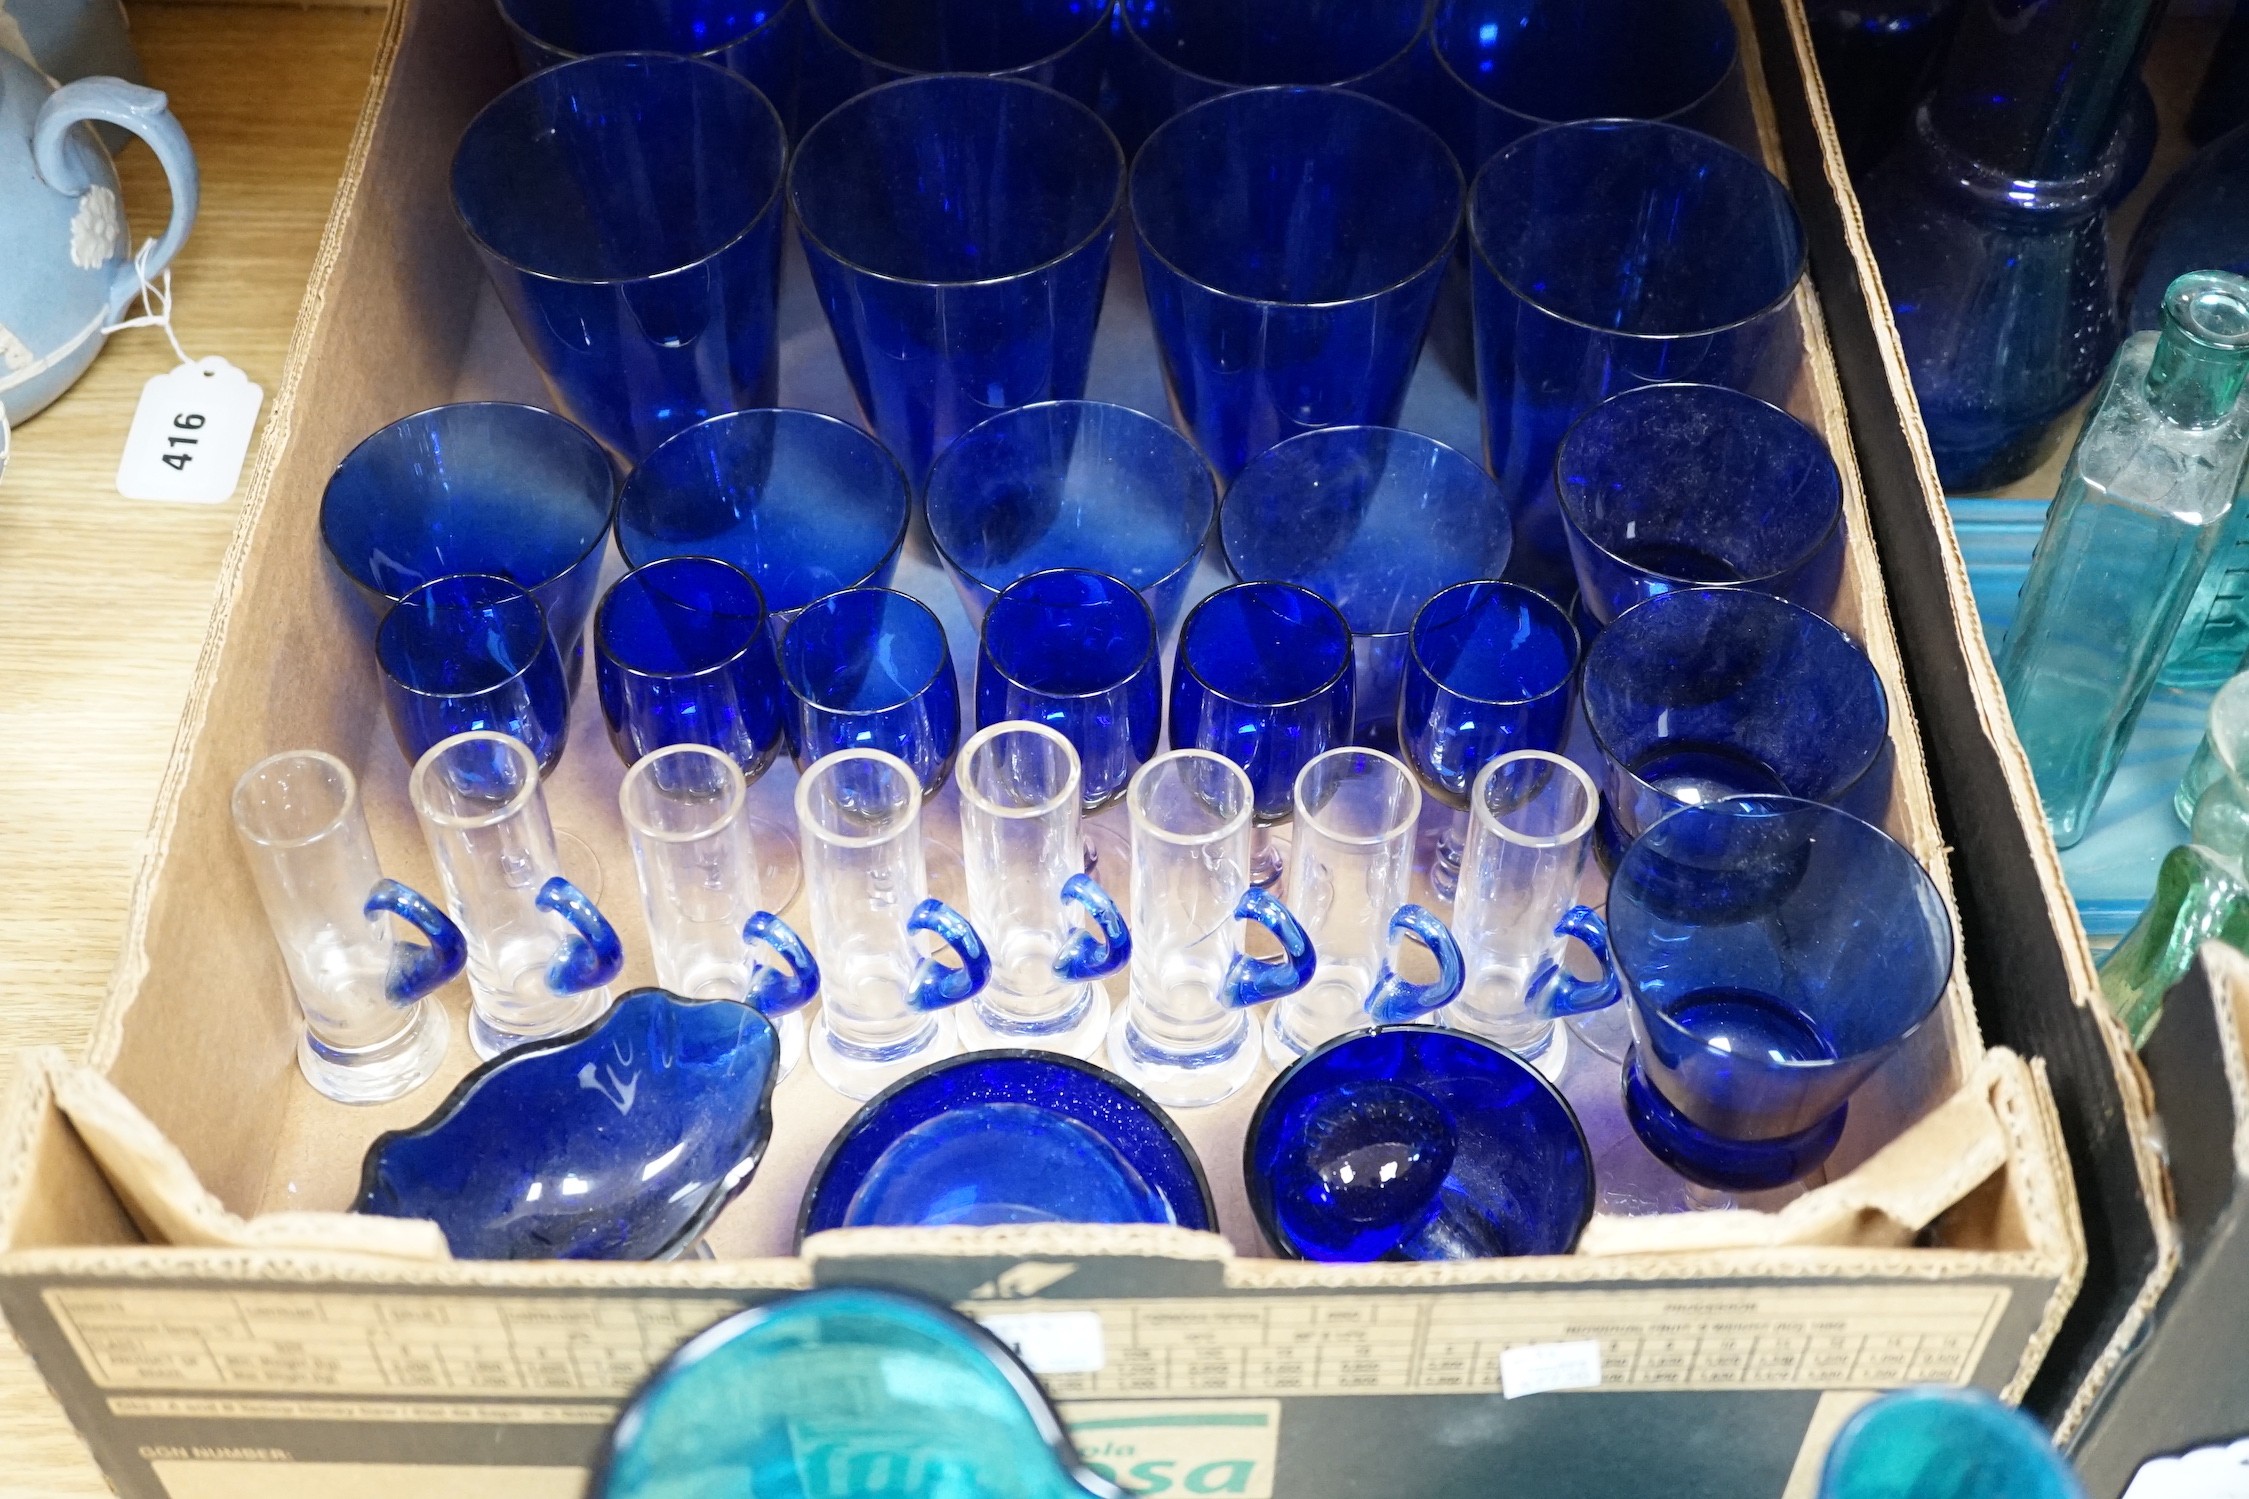 A collection of dark blue, green and turquoise coloured glassware, including three long stemmed glasses